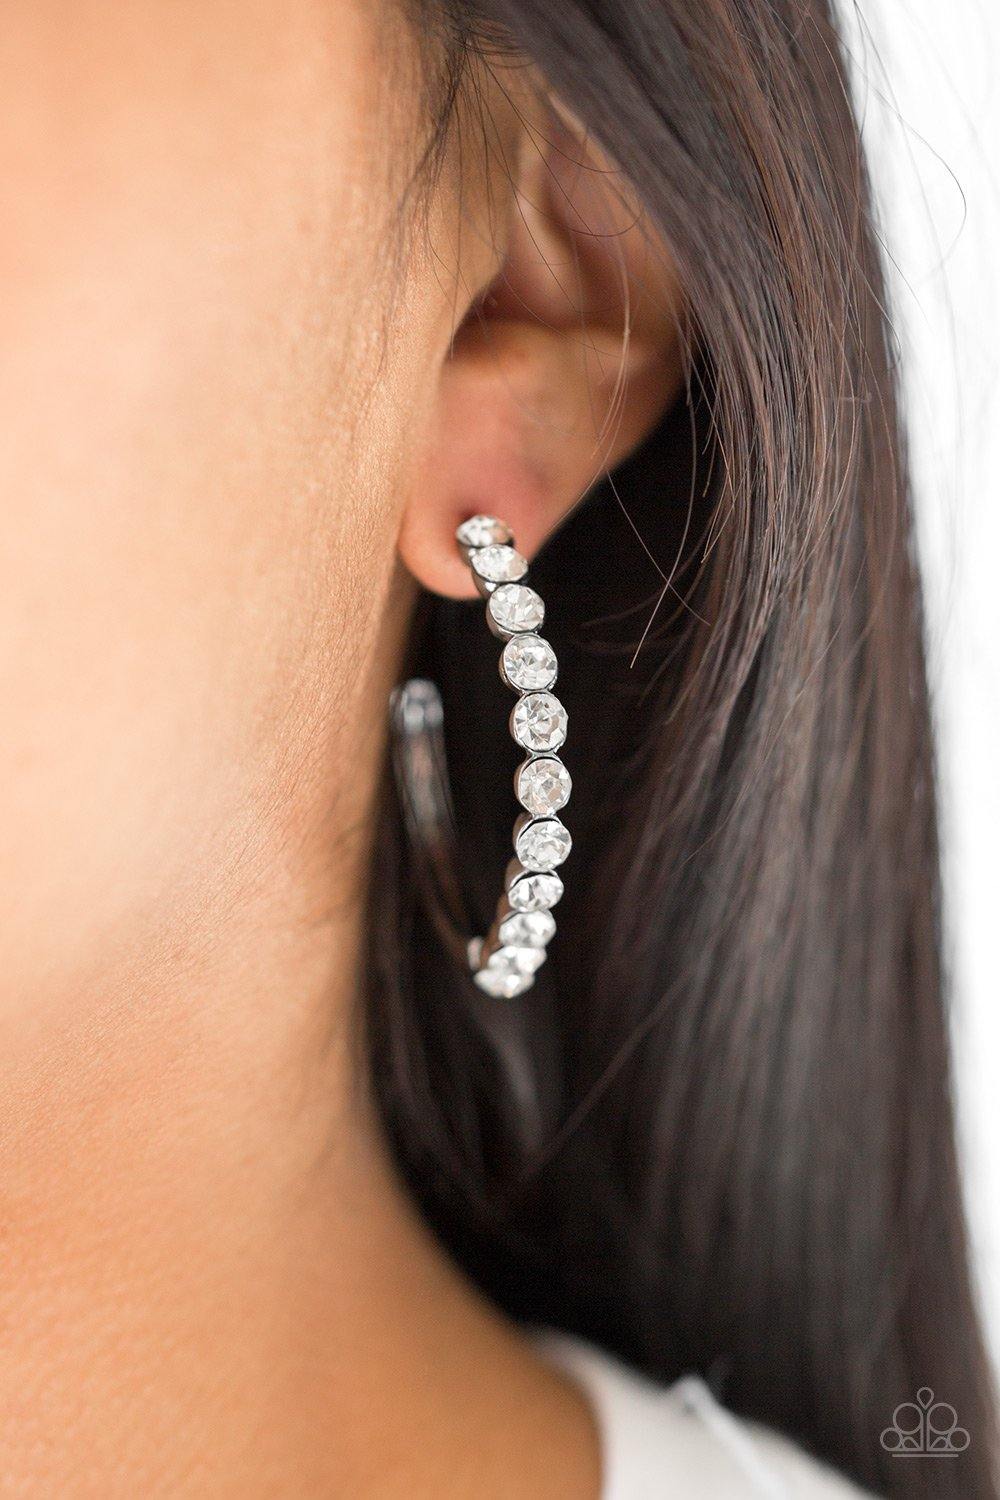 My Kind Of Shine - Black Earrings - Paparazzi Accessories - Sassysblingandthings